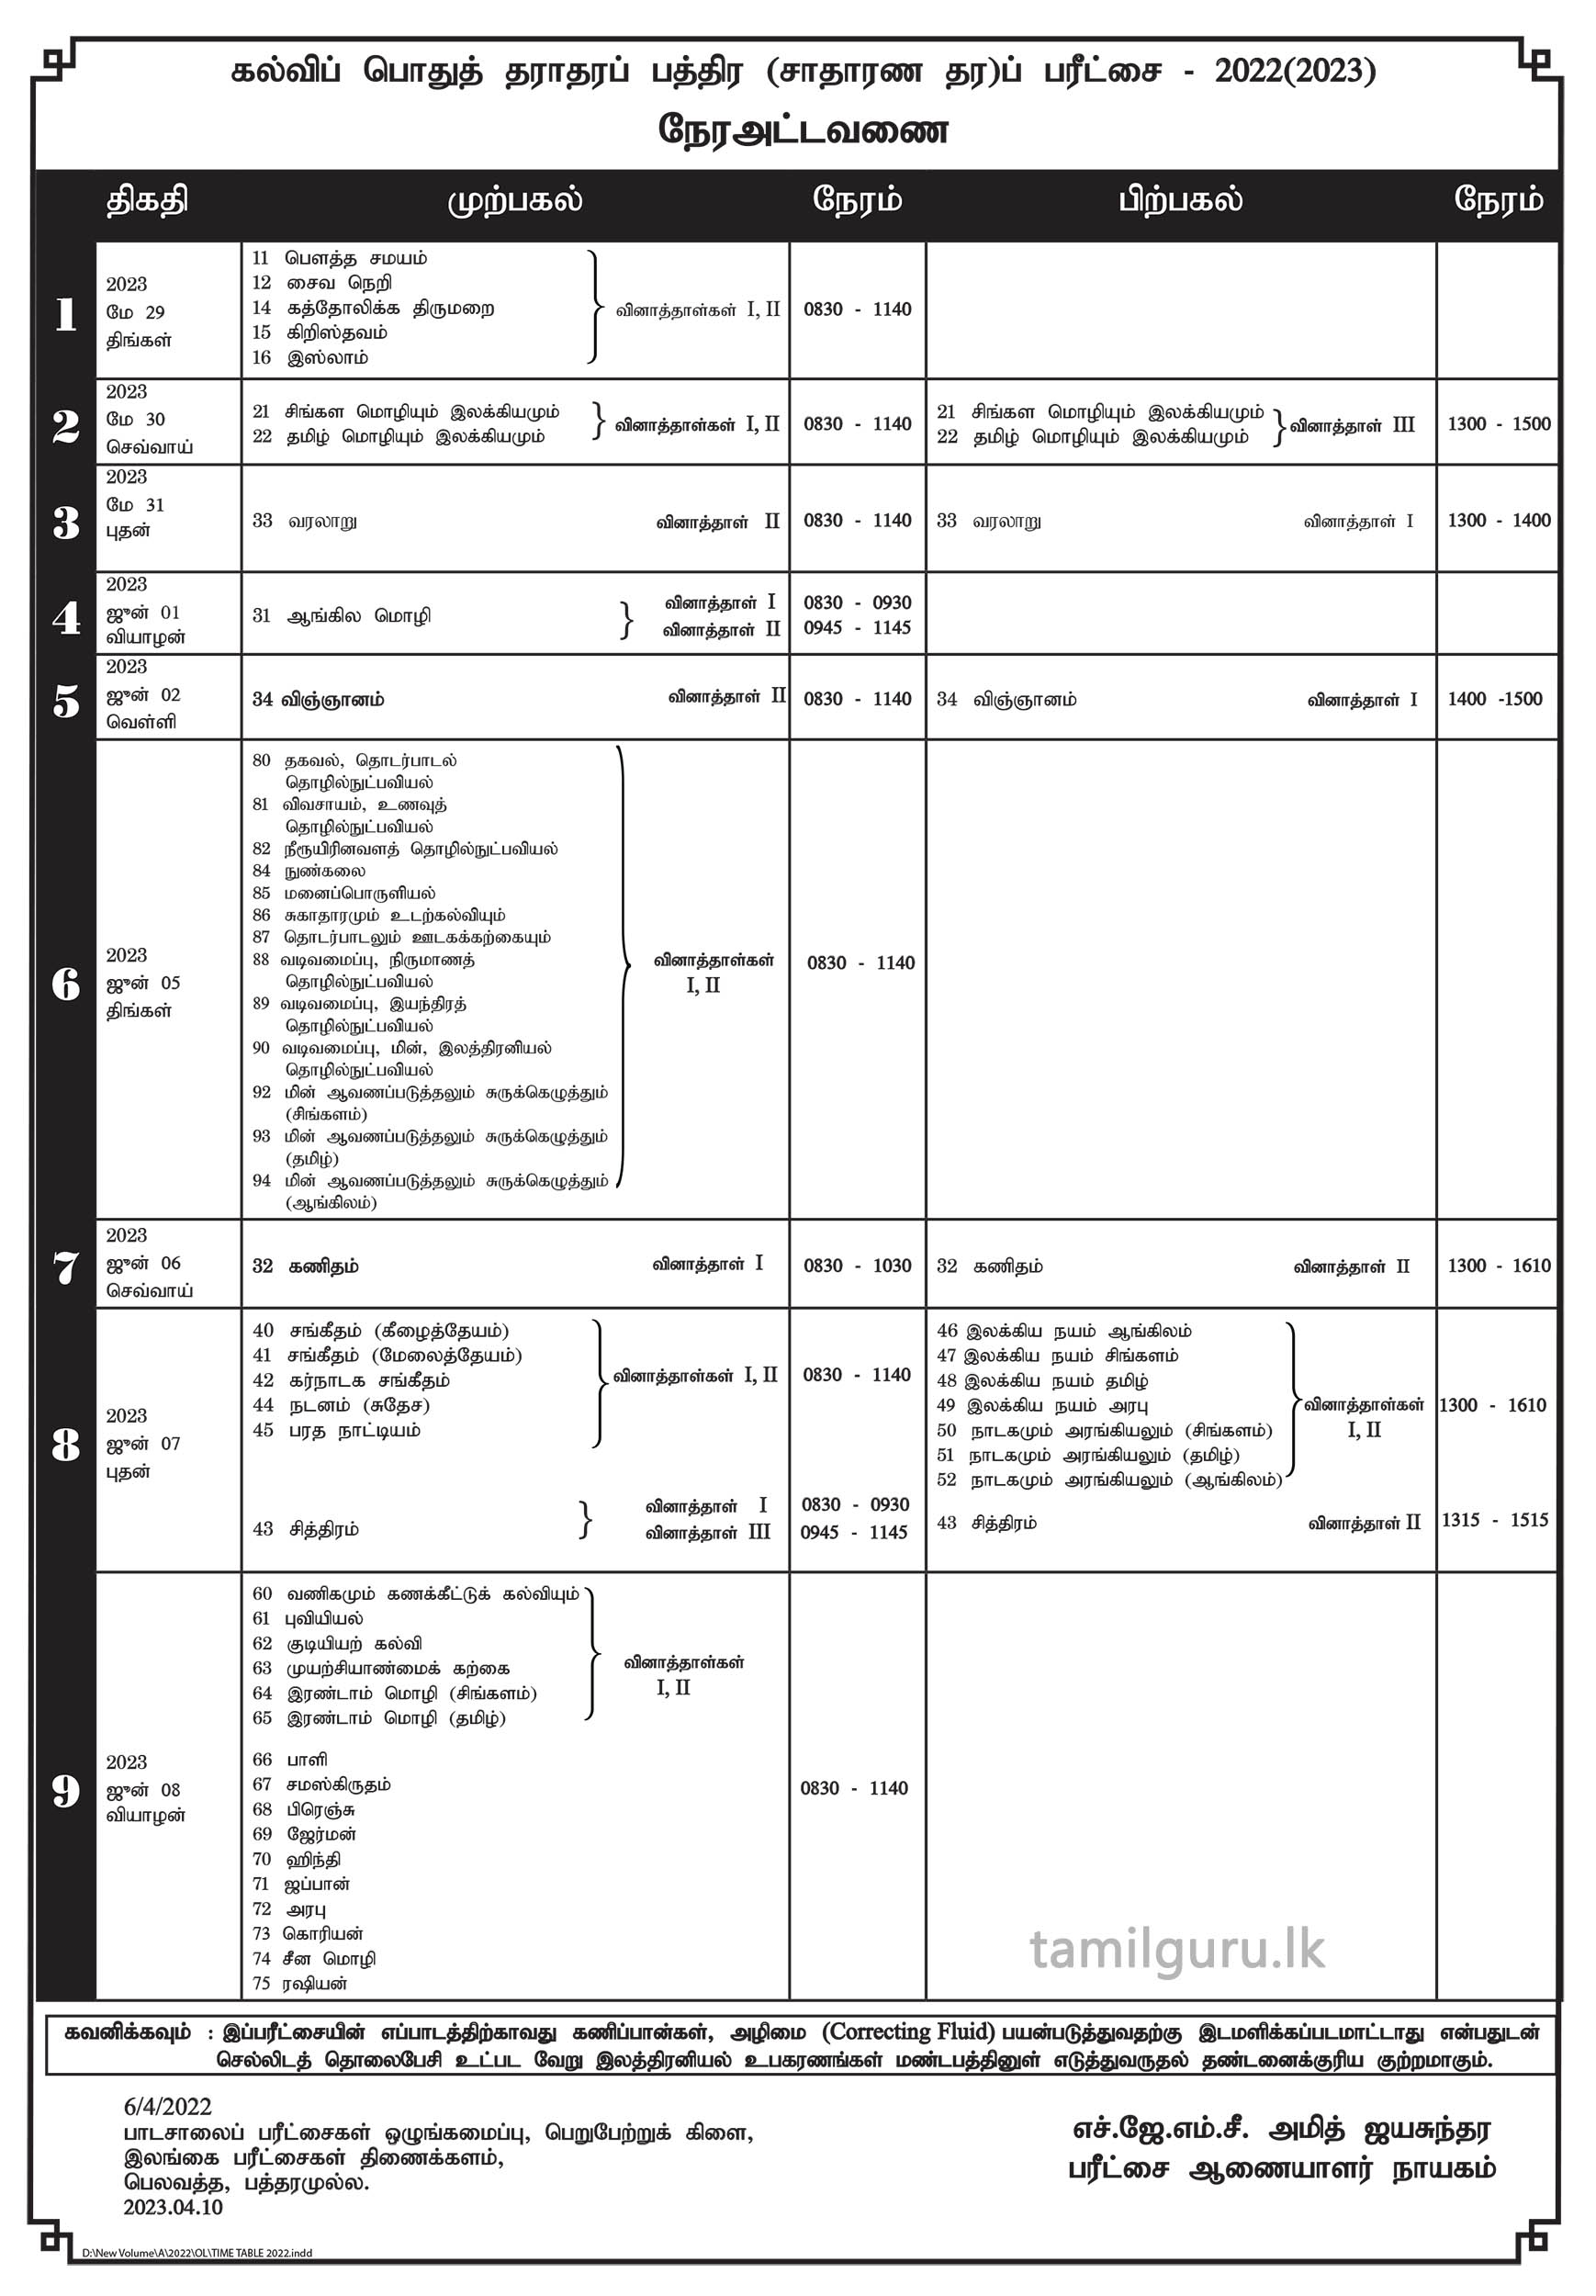 G.C.E. O/L Examination Time Table 2022 (2023) - Department of Examinations